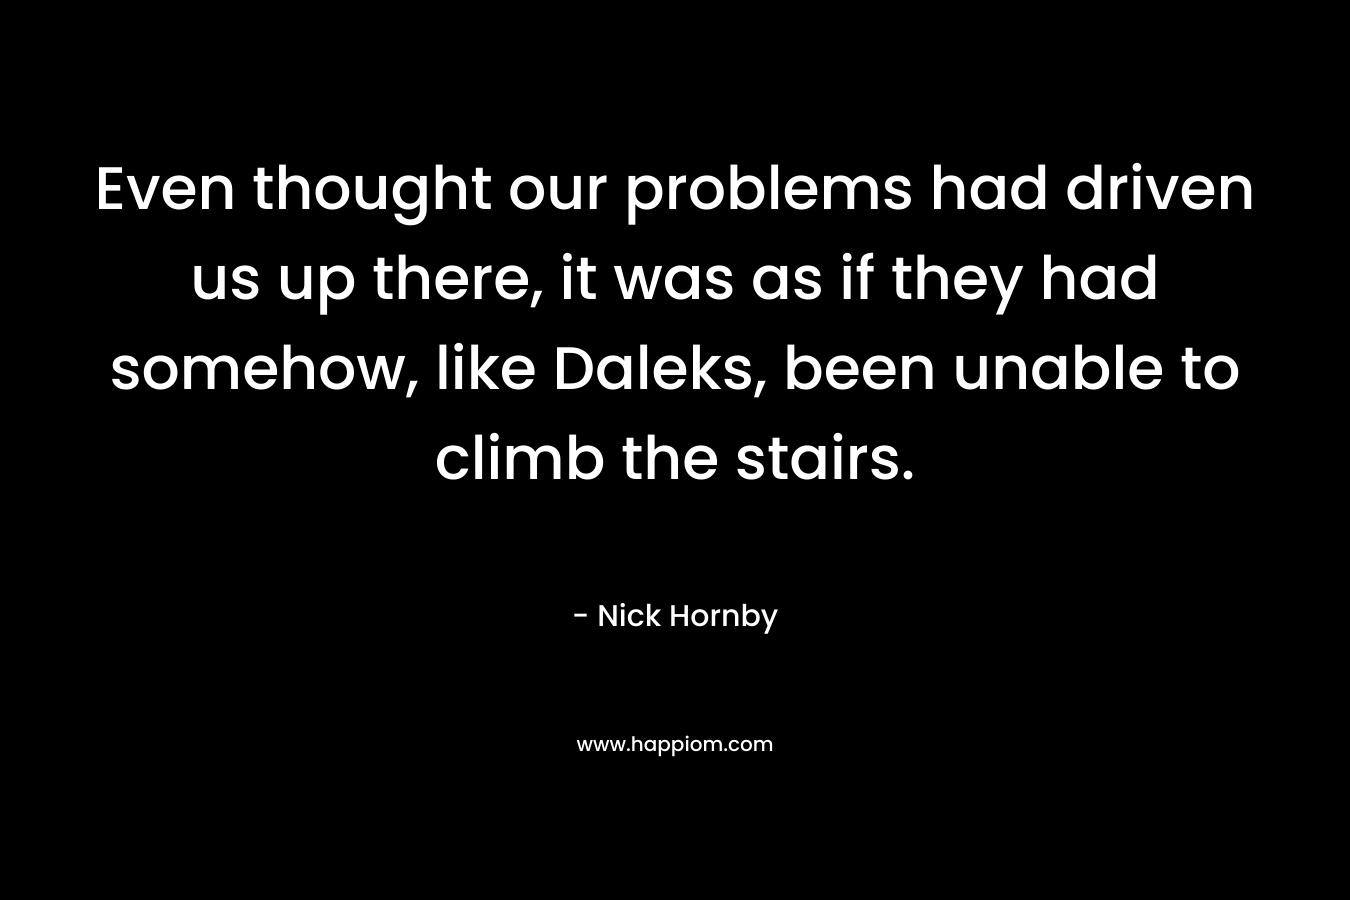 Even thought our problems had driven us up there, it was as if they had somehow, like Daleks, been unable to climb the stairs. – Nick Hornby